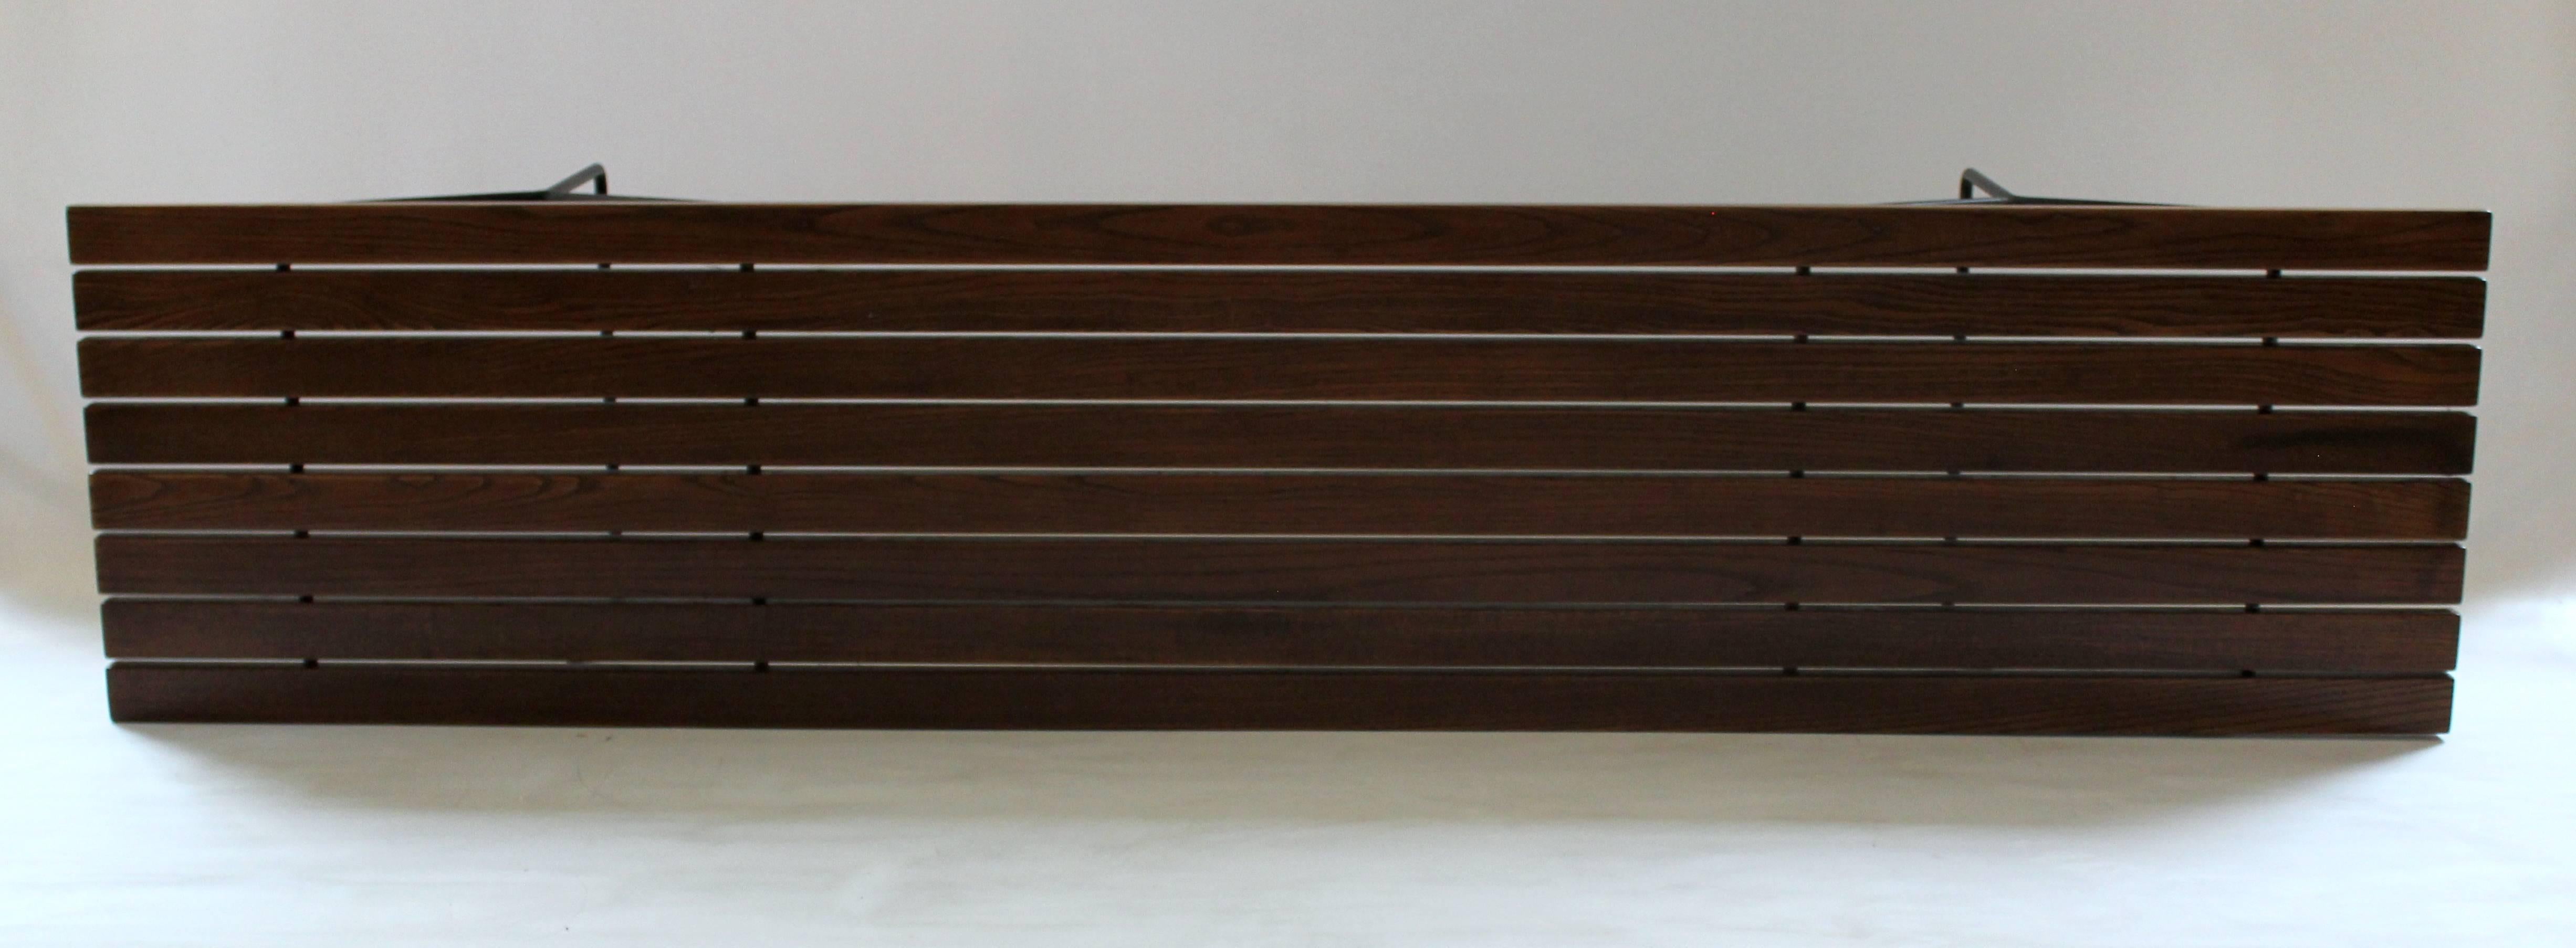 Early Harry Bertoia for Knoll Slatted Wood and Iron Bench 1